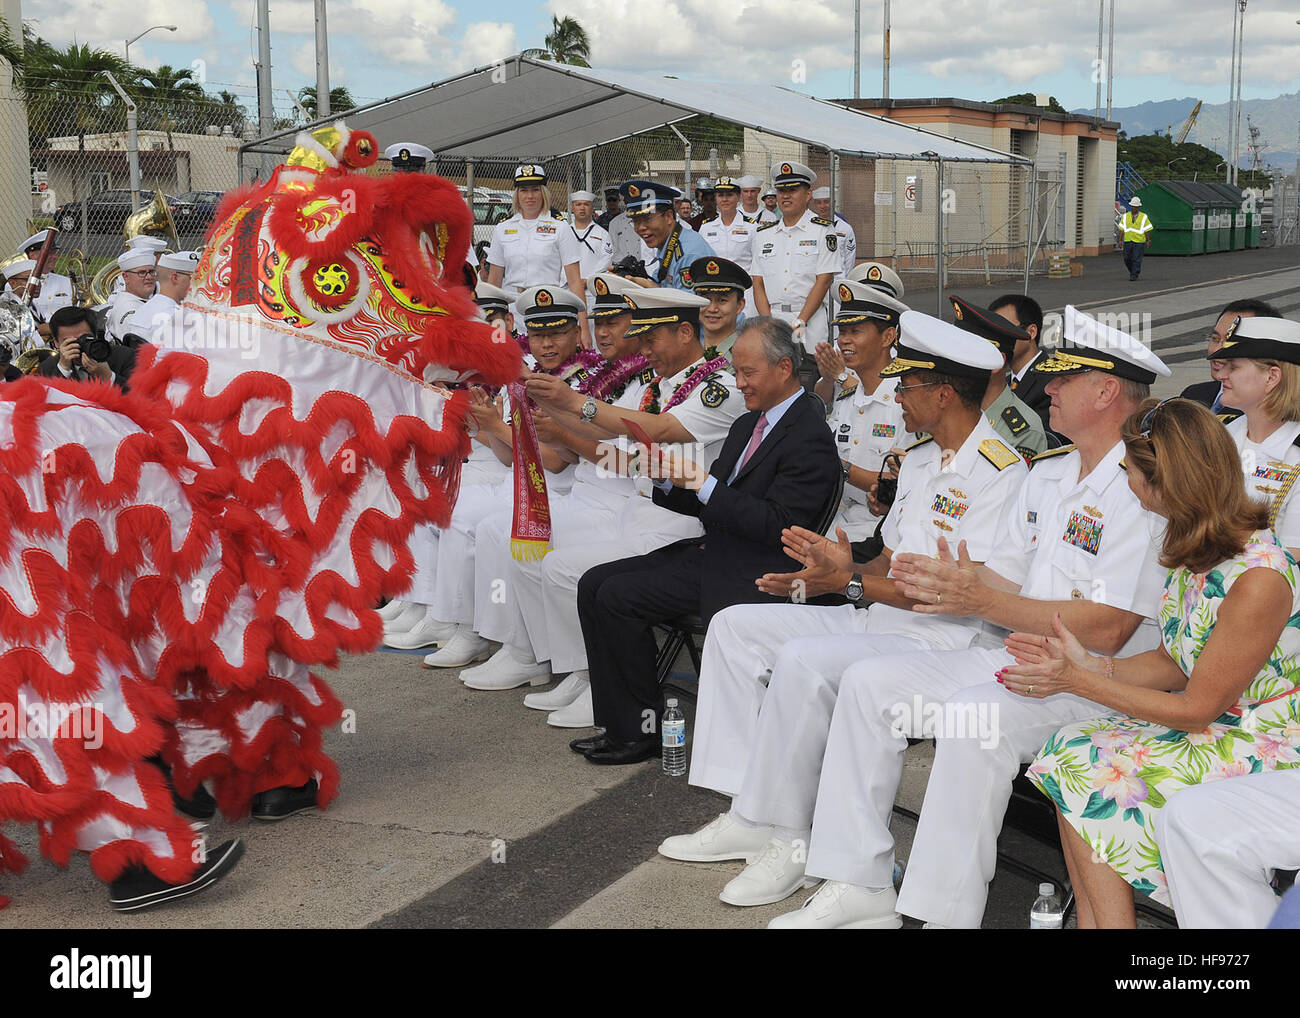 130906-N-ZK021-007 – PEARL HARBOR-HICKAM (Sept. 6, 2013) – U.S. and Chinese leaders watch as lion dancers perform during an arrival ceremony for three People’s Liberation Army-Navy ships Luhu-class destroyer Qingdao (DDG 113), Jiangkai-class frigate Linyi (FFG 547) and a Fuqing-class fleet oiler as they arrive in Hawaii for a scheduled port visit. Over the weekend, Chinese and U.S. leaders will conduct dialogues to build confidence and mutual understanding between the two nations. The port visit is part of the U.S. Navy’s ongoing effort to maximize opportunities for developing relationships wi Stock Photo